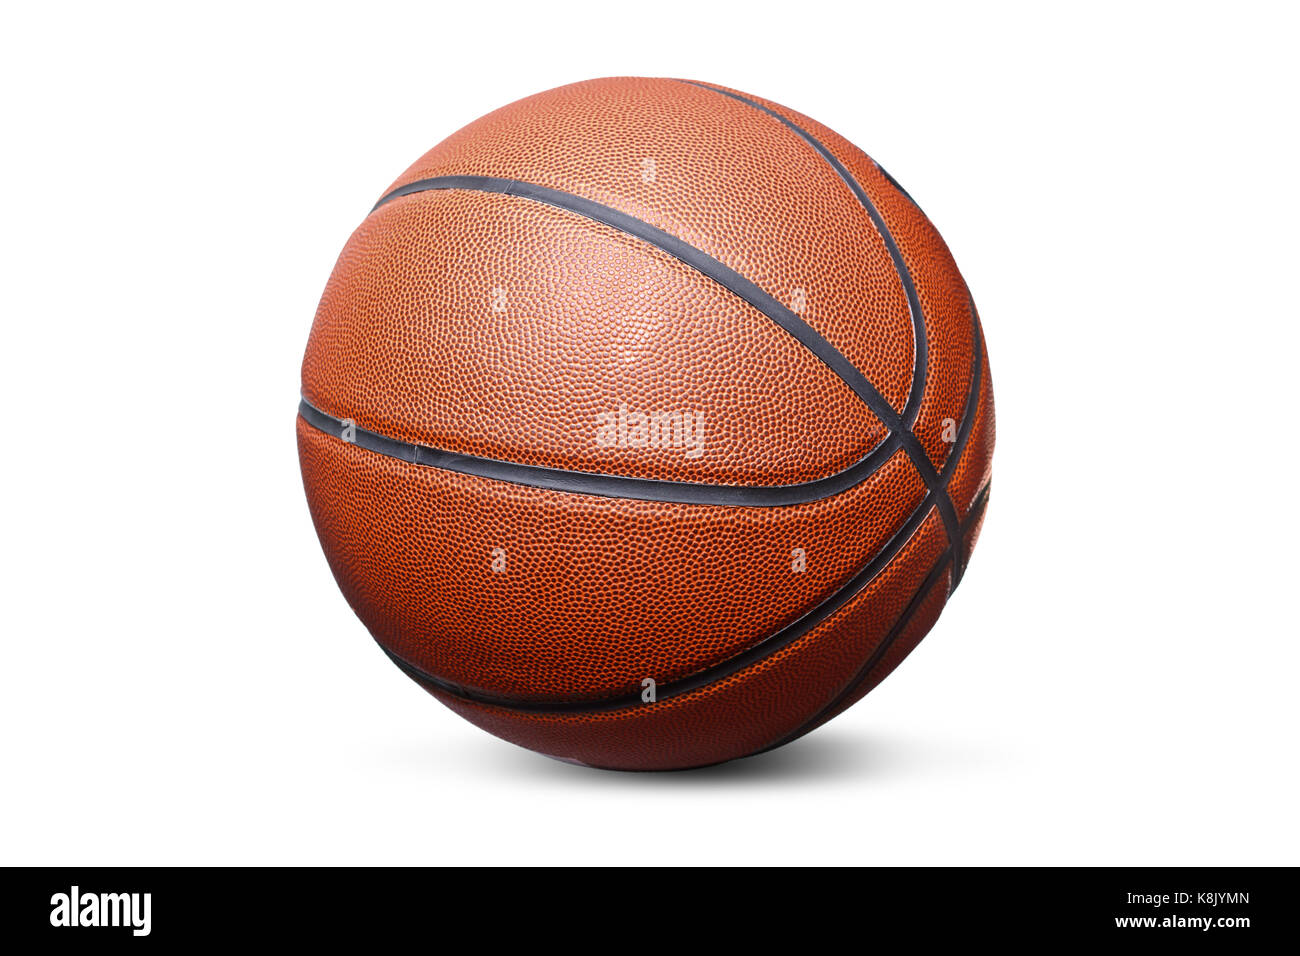 Basketball isolated on a white background. Stock Photo